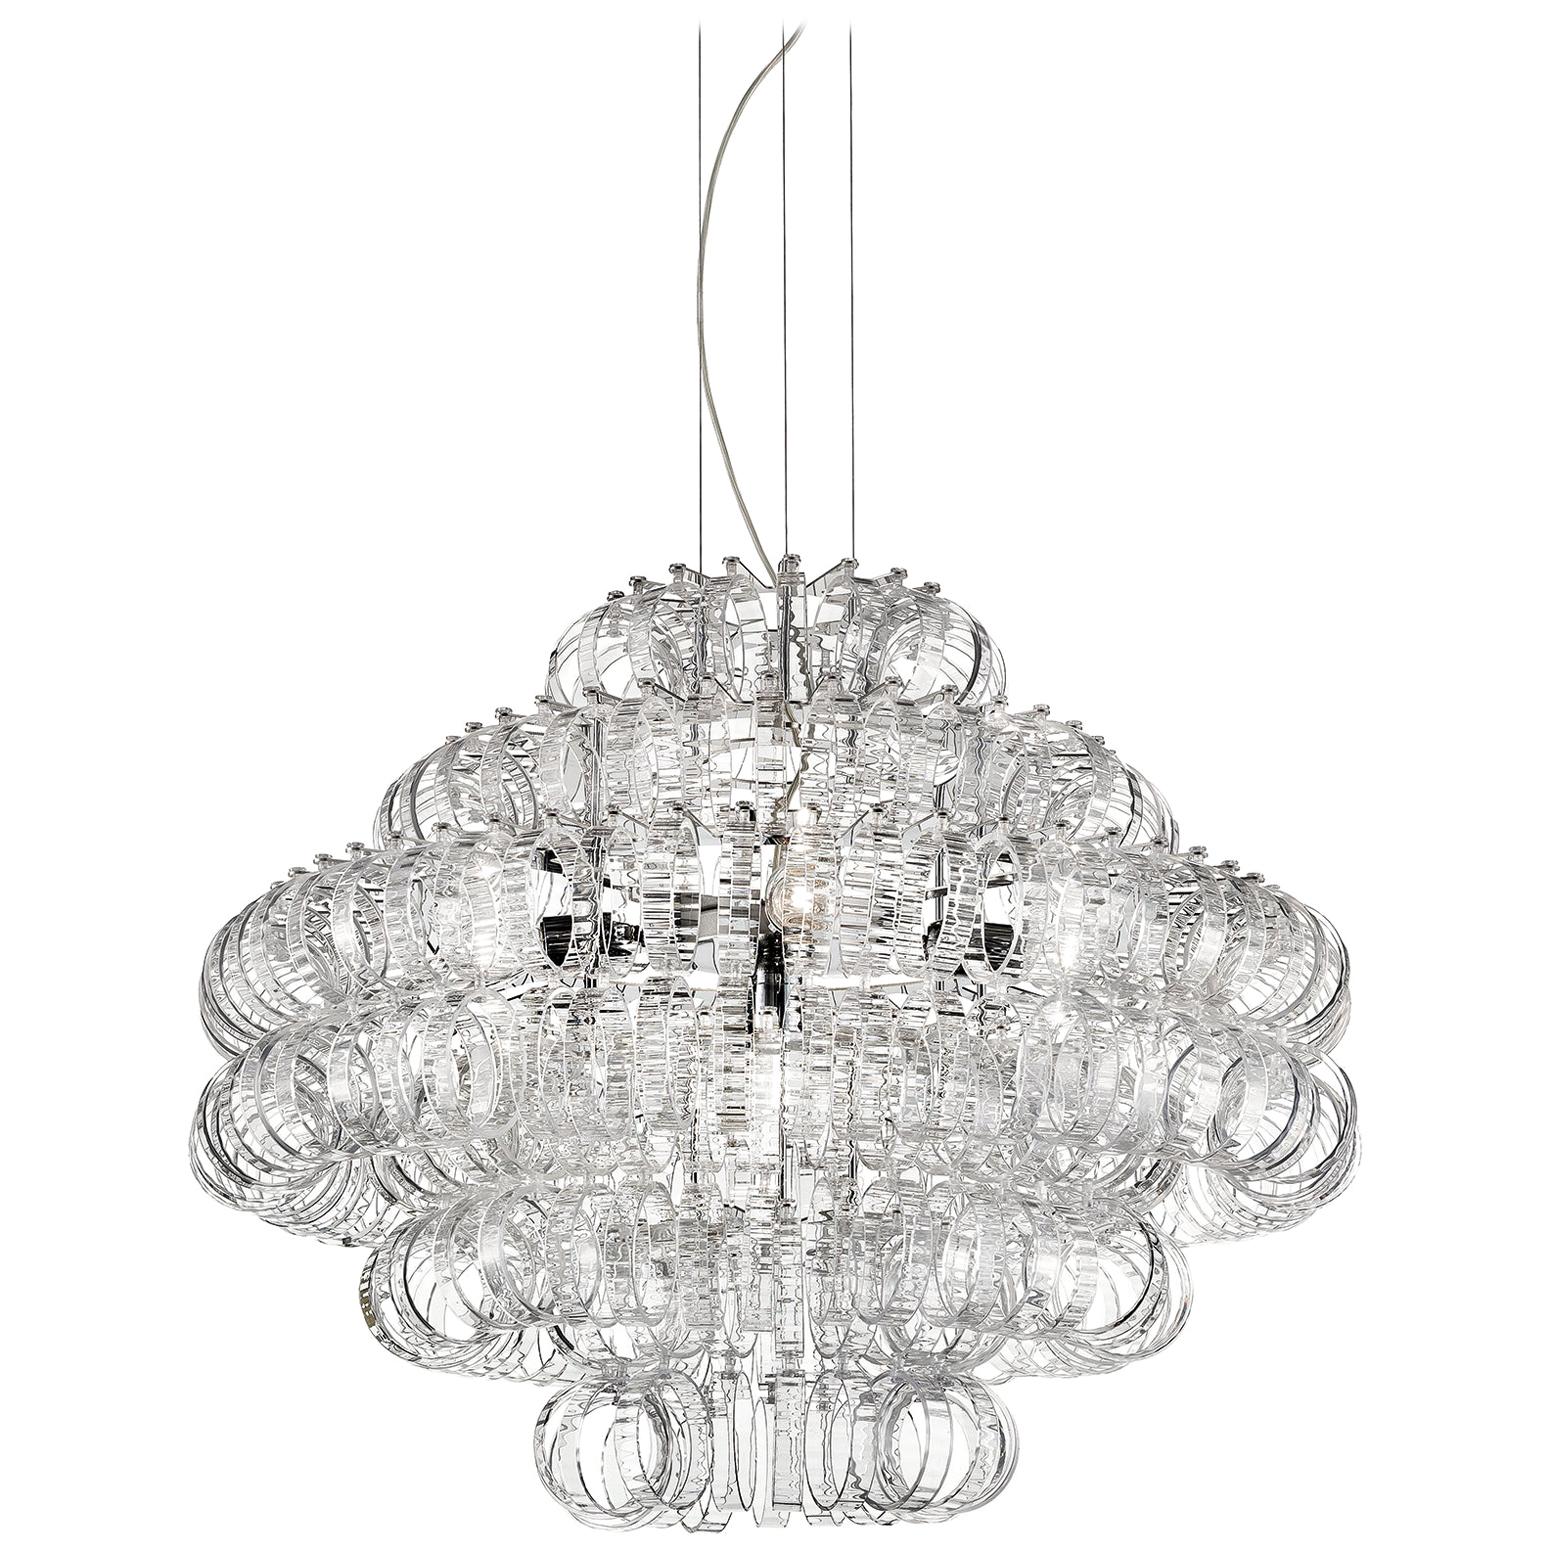 Large Ecos SP 90 Chandelier with Chrome Frame by Vistosi